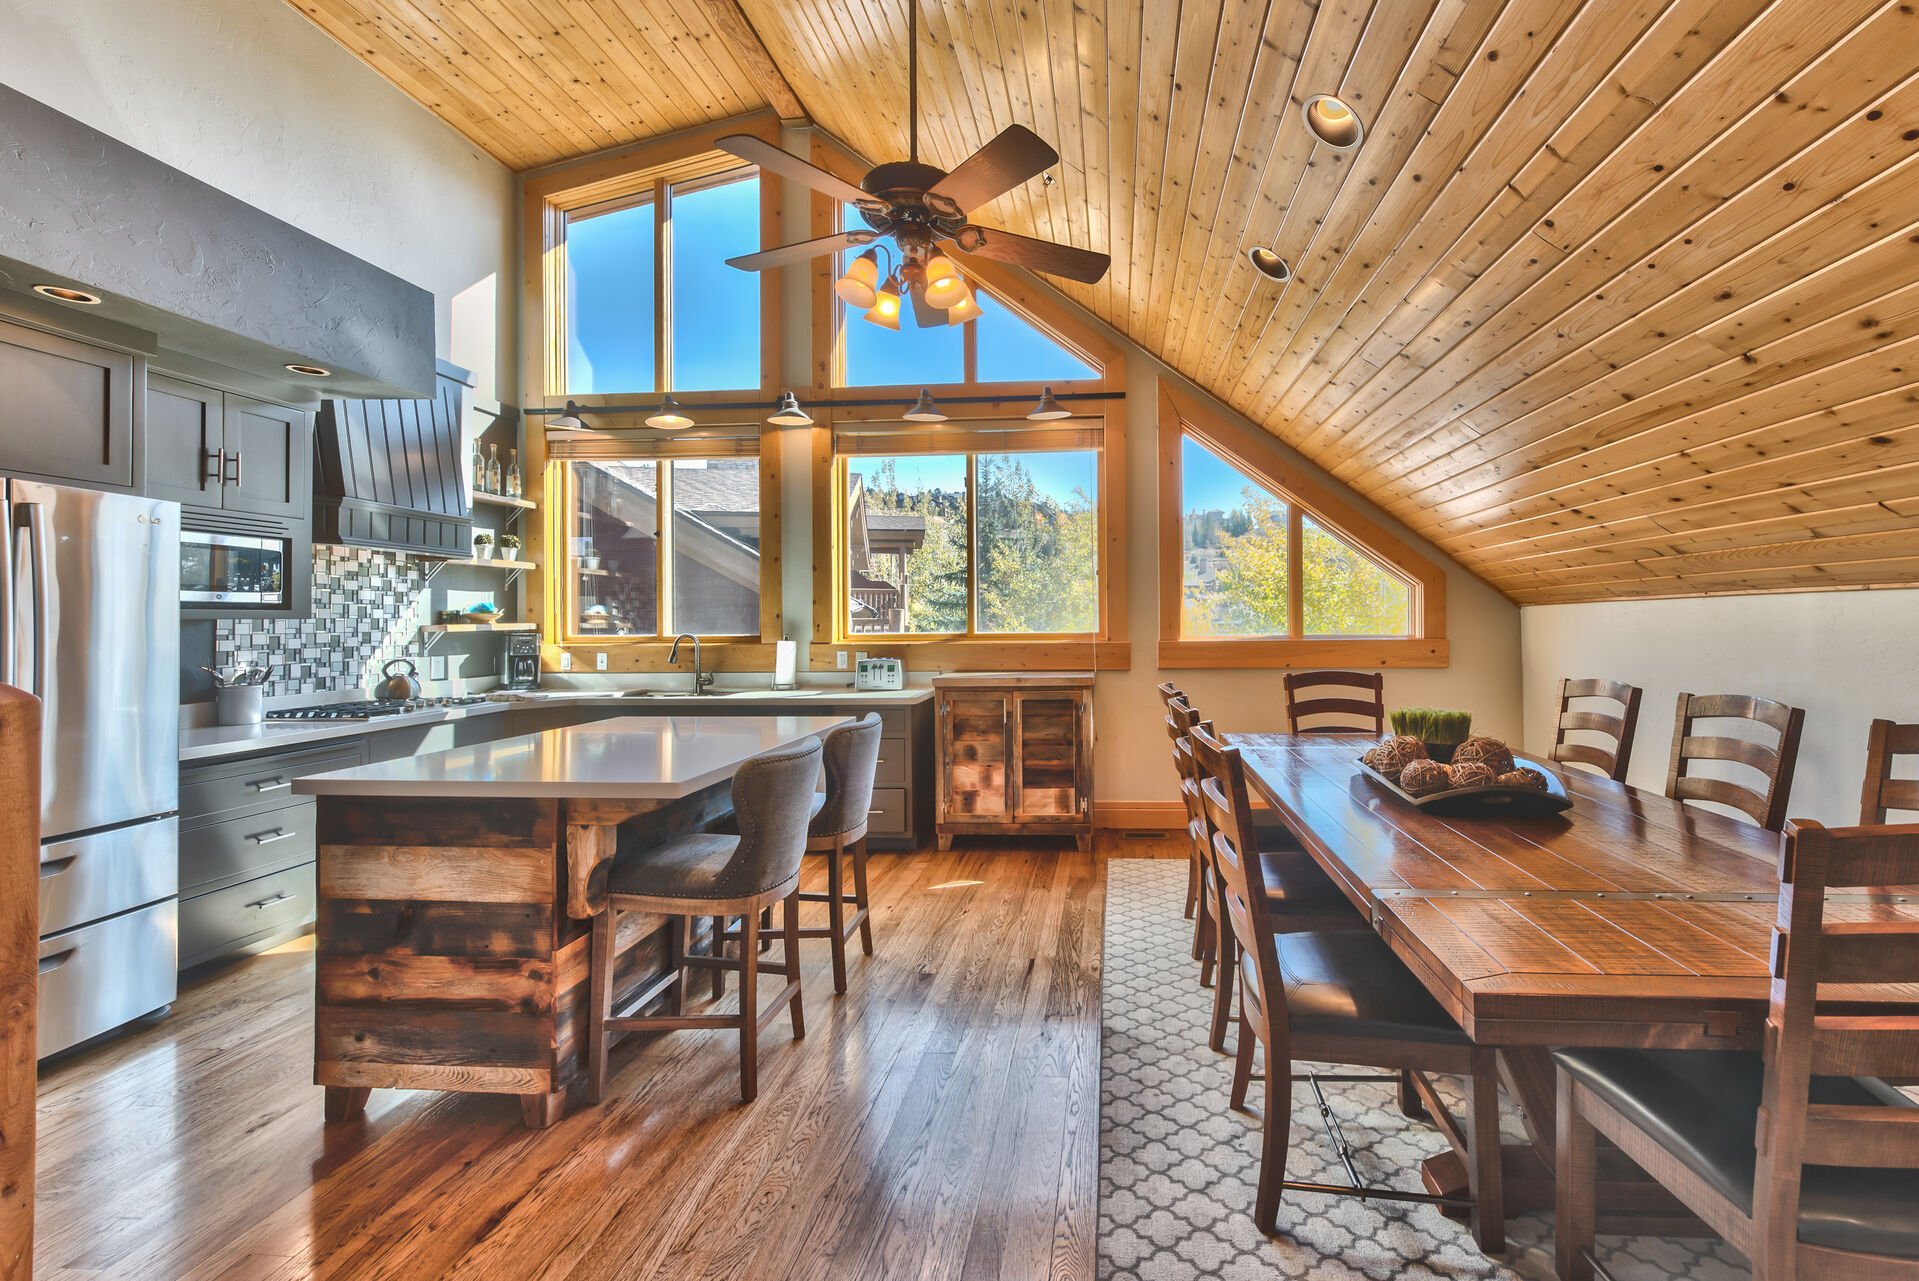 408 B- Kitchen and Dining Area with Hardwood Floors and Mountain Views